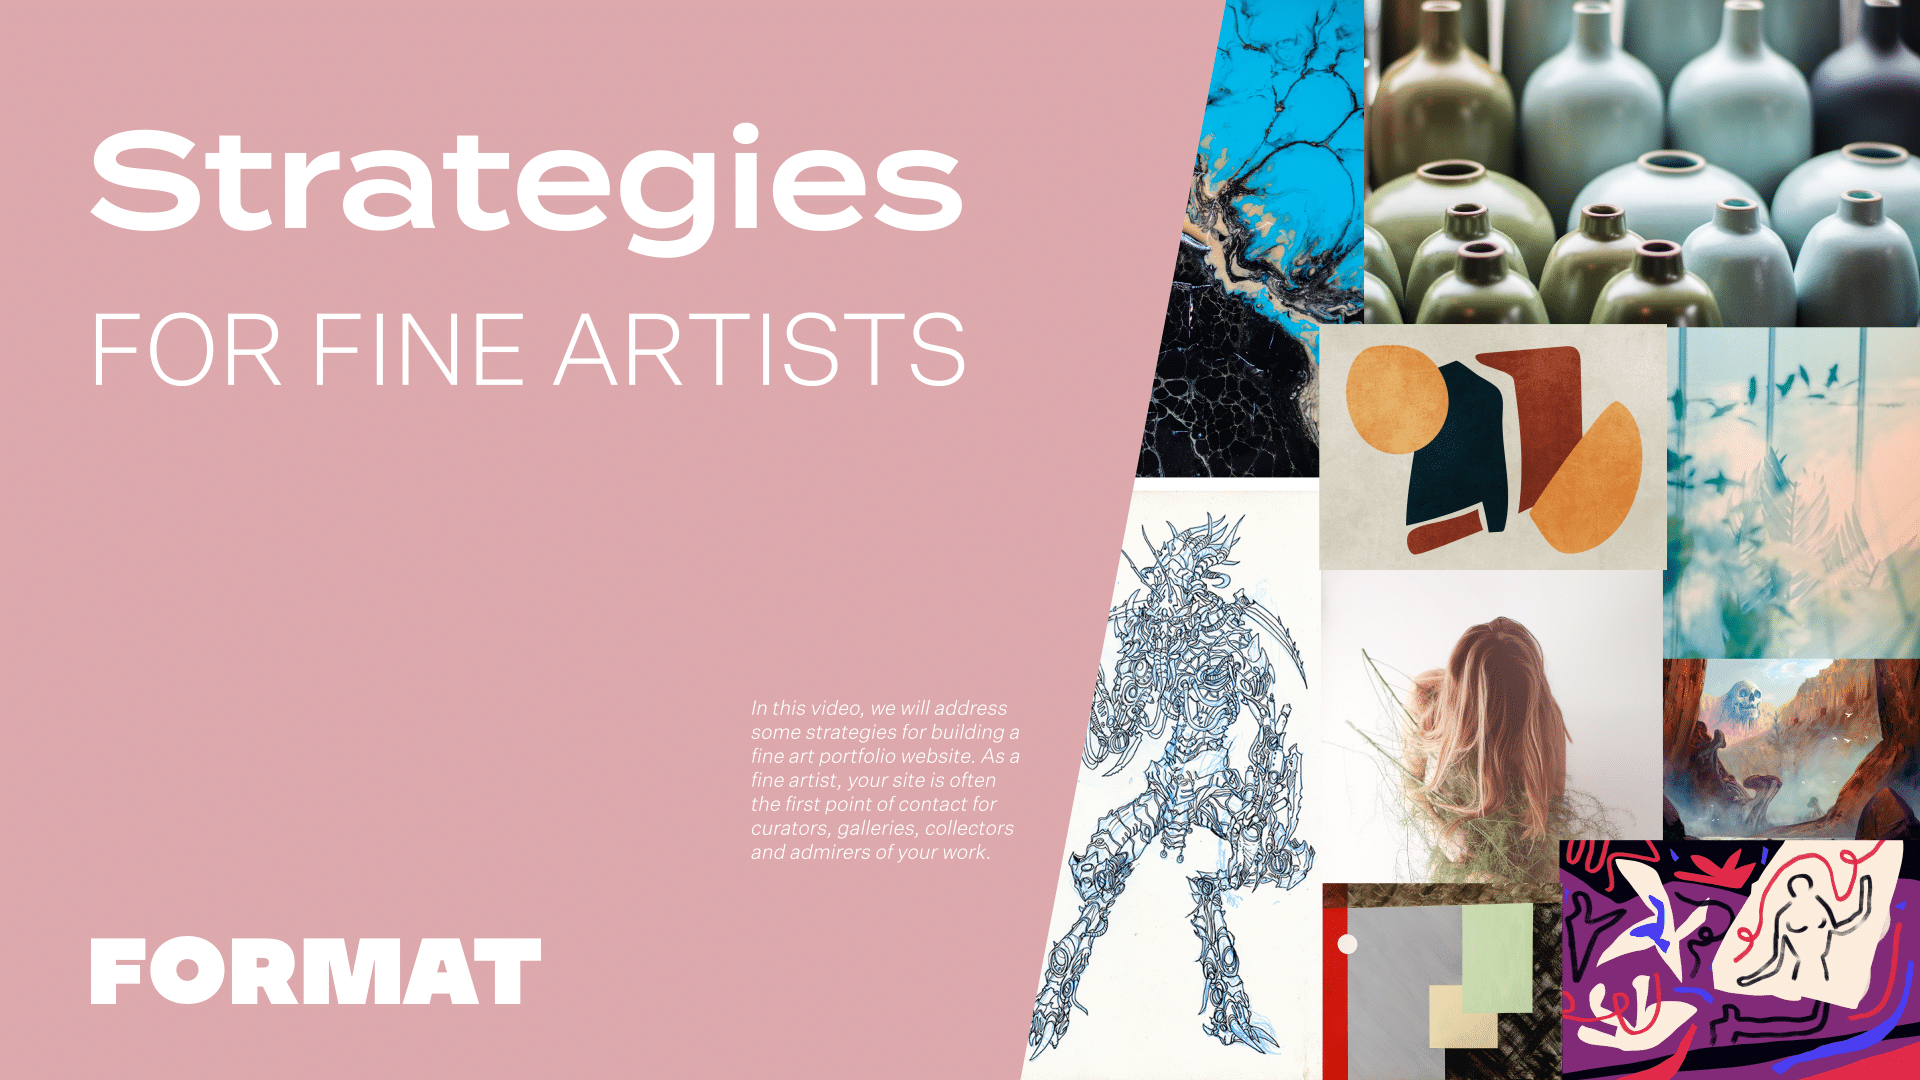 Text in image reads "Strategies for Fine Artists" and shows ceramic vases